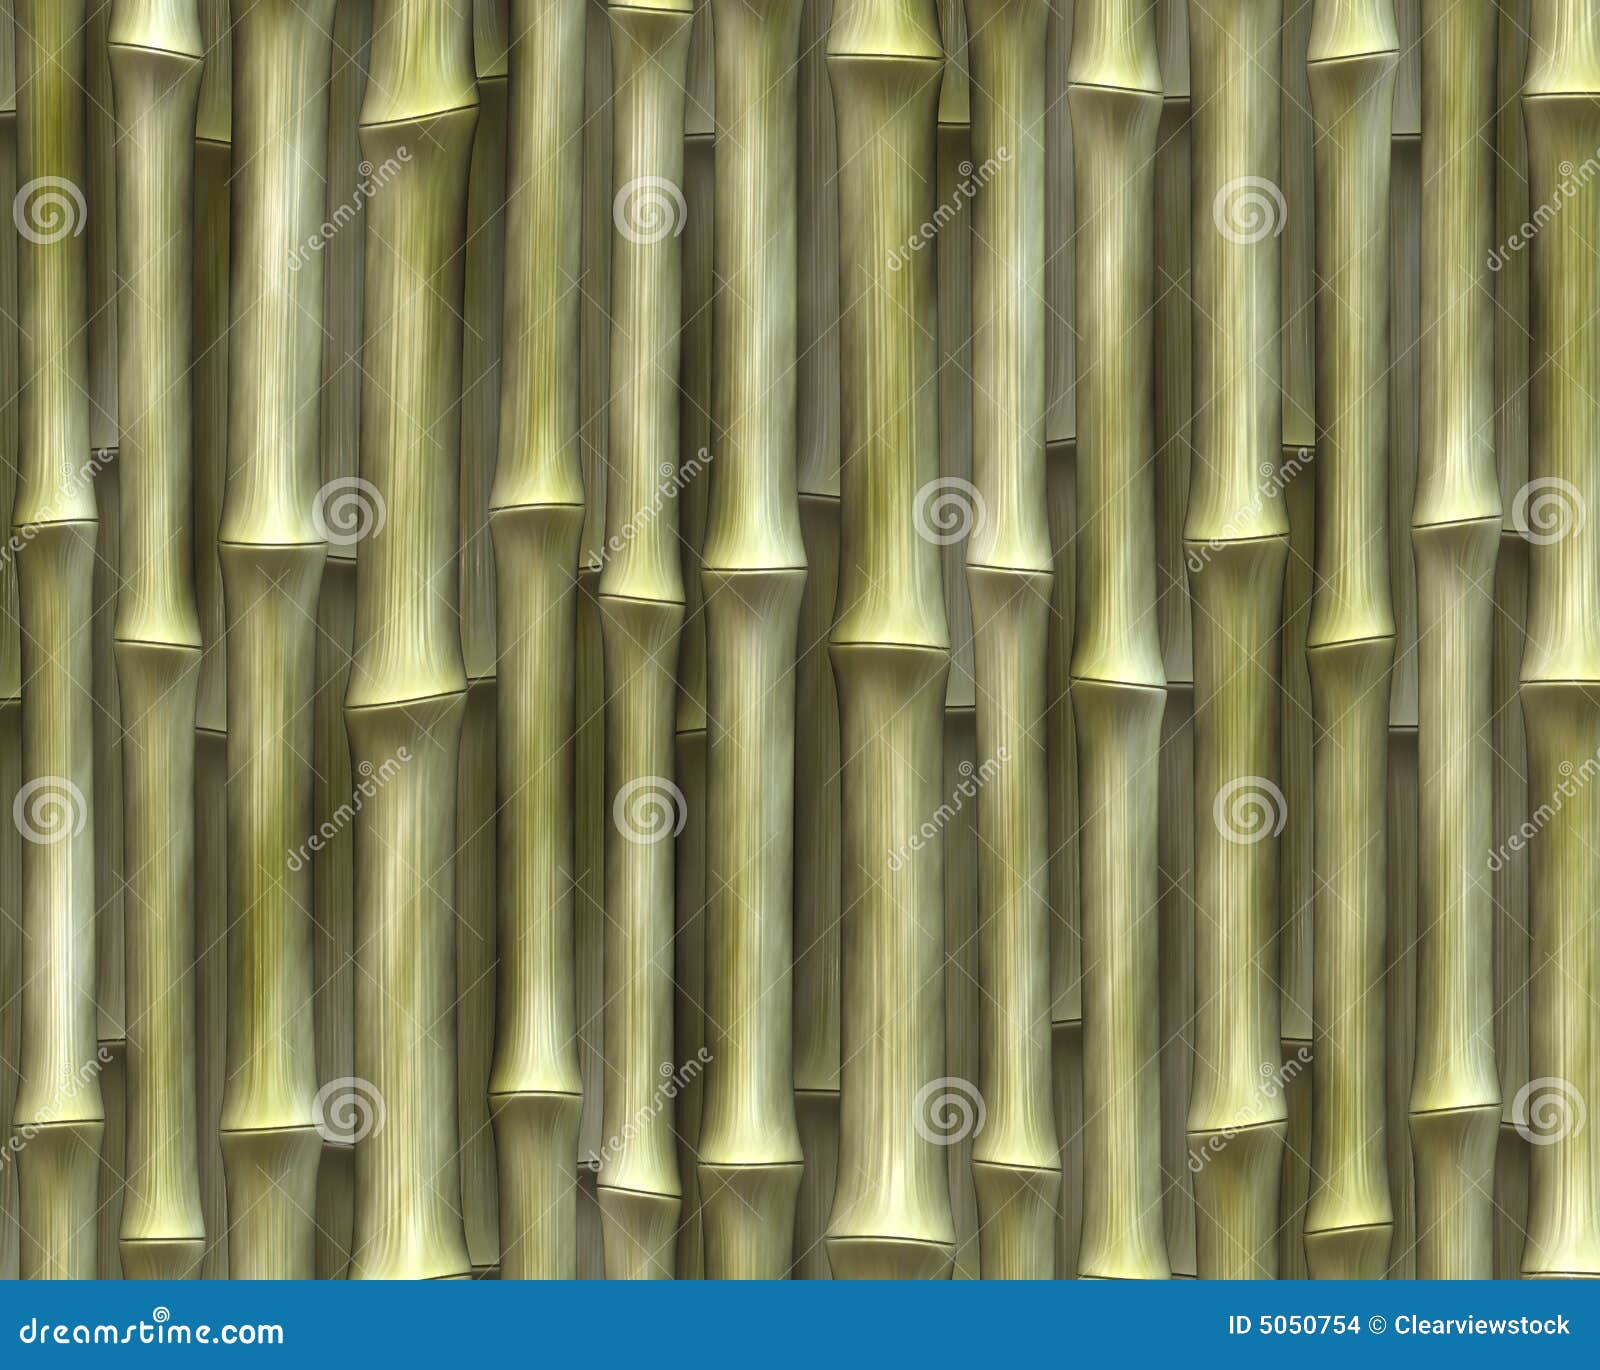 Bamboo Wood Images – Browse 399,251 Stock Photos, Vectors, and